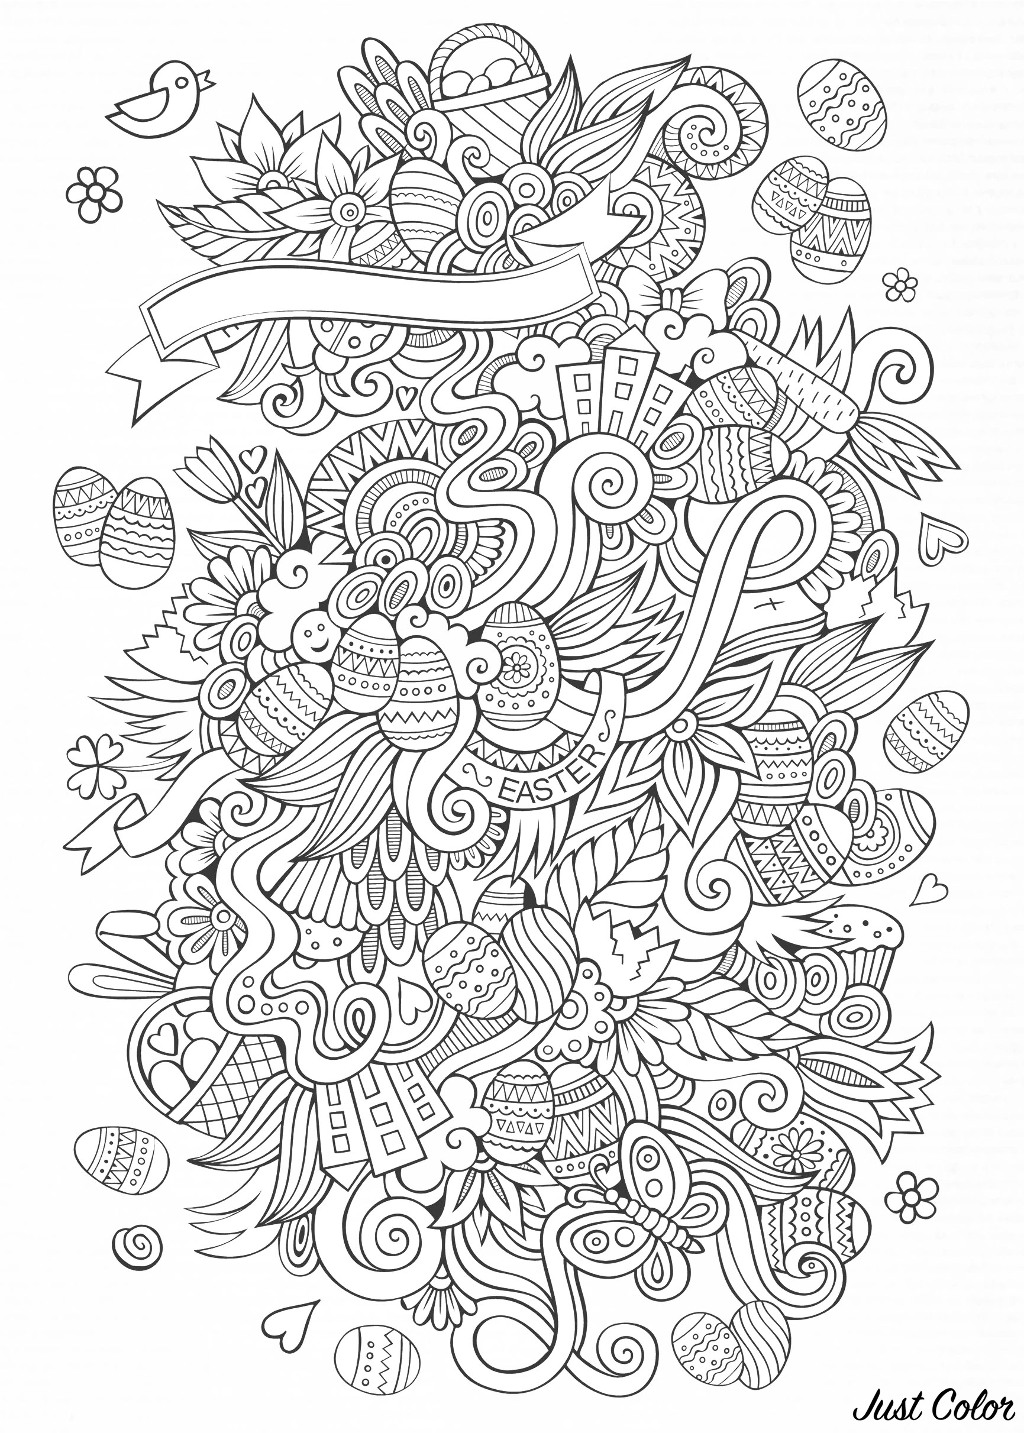 Easter eggs, Easter bunnies, baskets ... In a beautiful doodle ... Perfect for a greeting card !